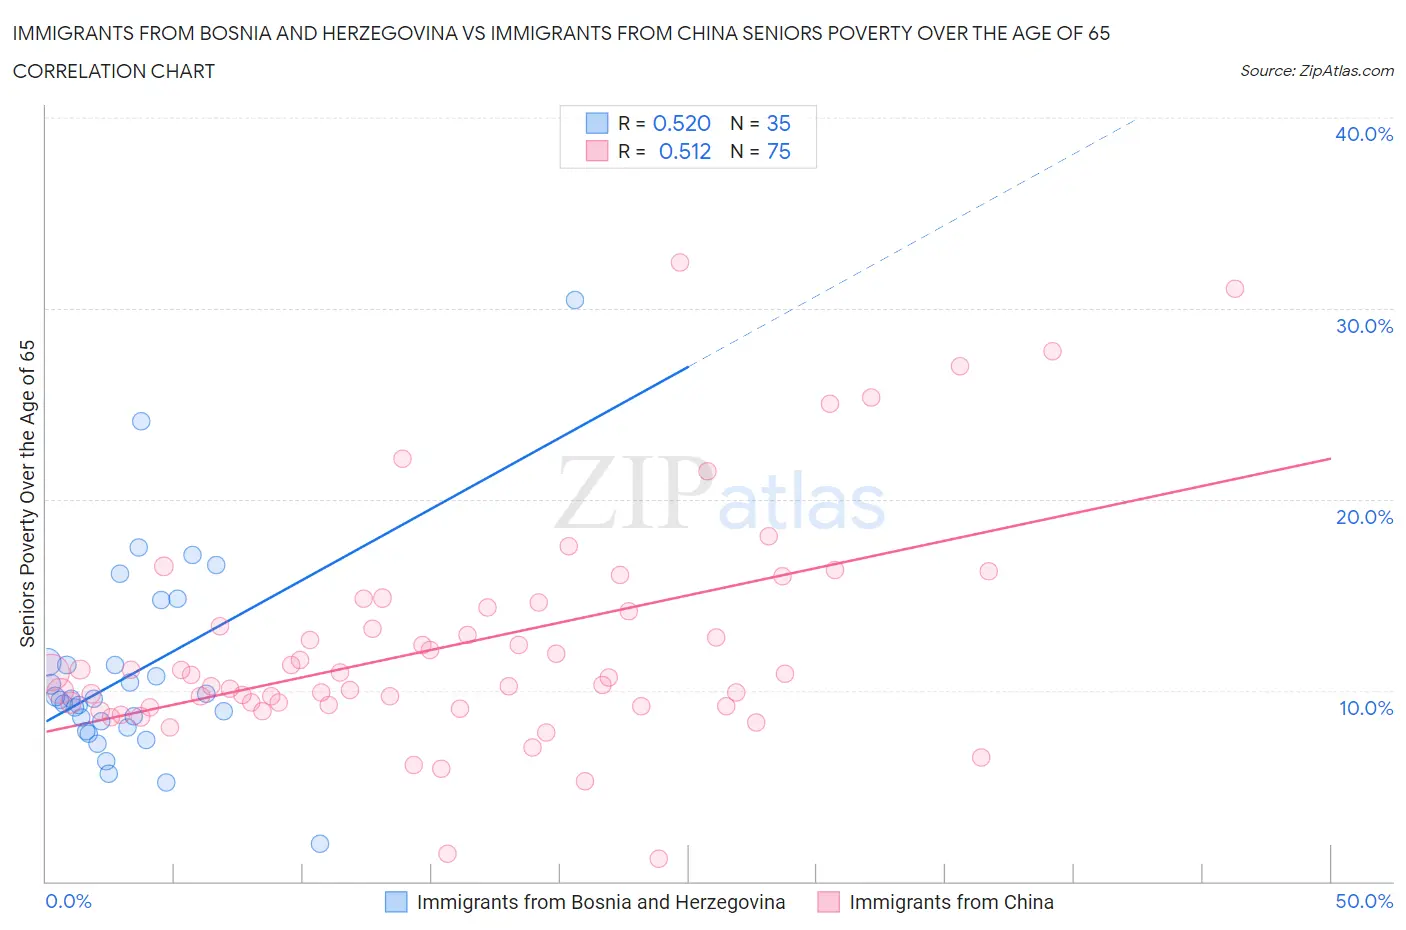 Immigrants from Bosnia and Herzegovina vs Immigrants from China Seniors Poverty Over the Age of 65